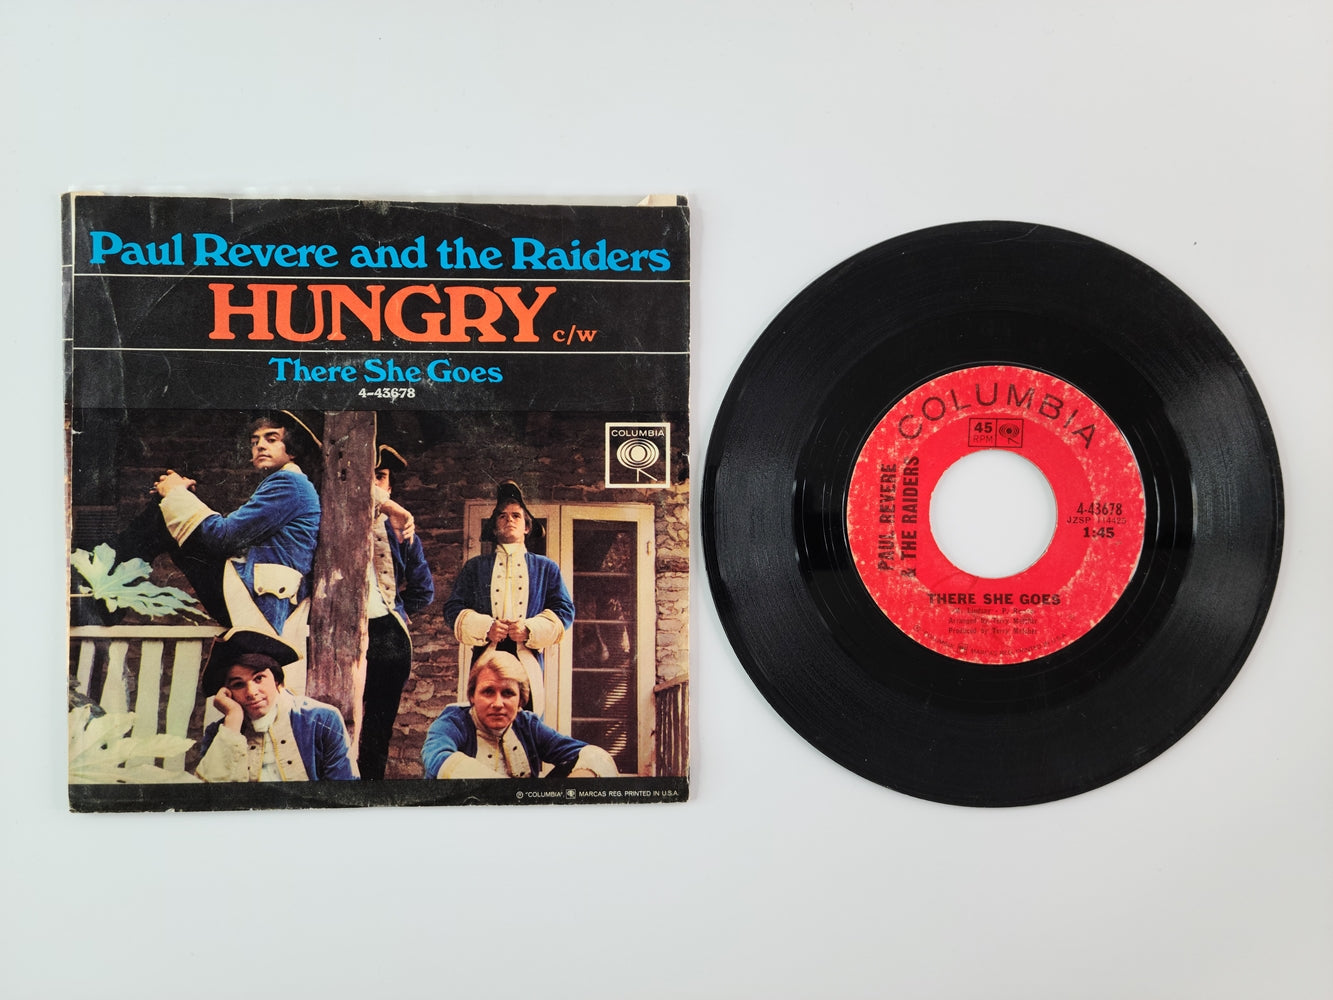 Paul Revere and the Raiders - Hungry / There She Goes (1966, 7'' Single)